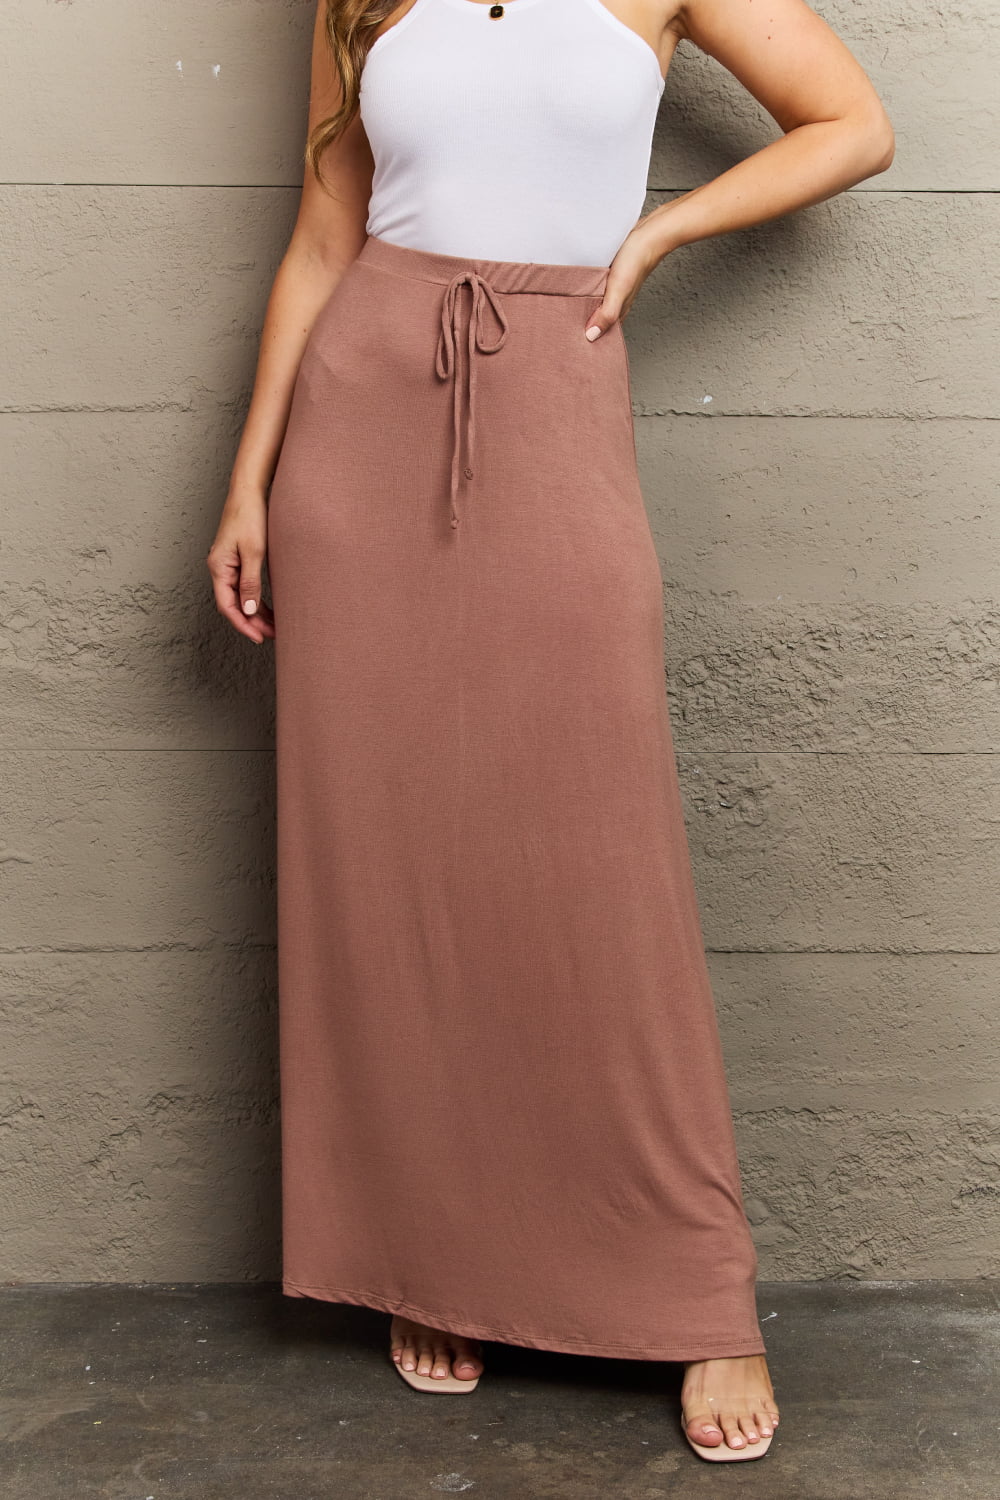 Culture Code For The Day Full Size Flare Maxi Skirt in Chocolate Chocolate